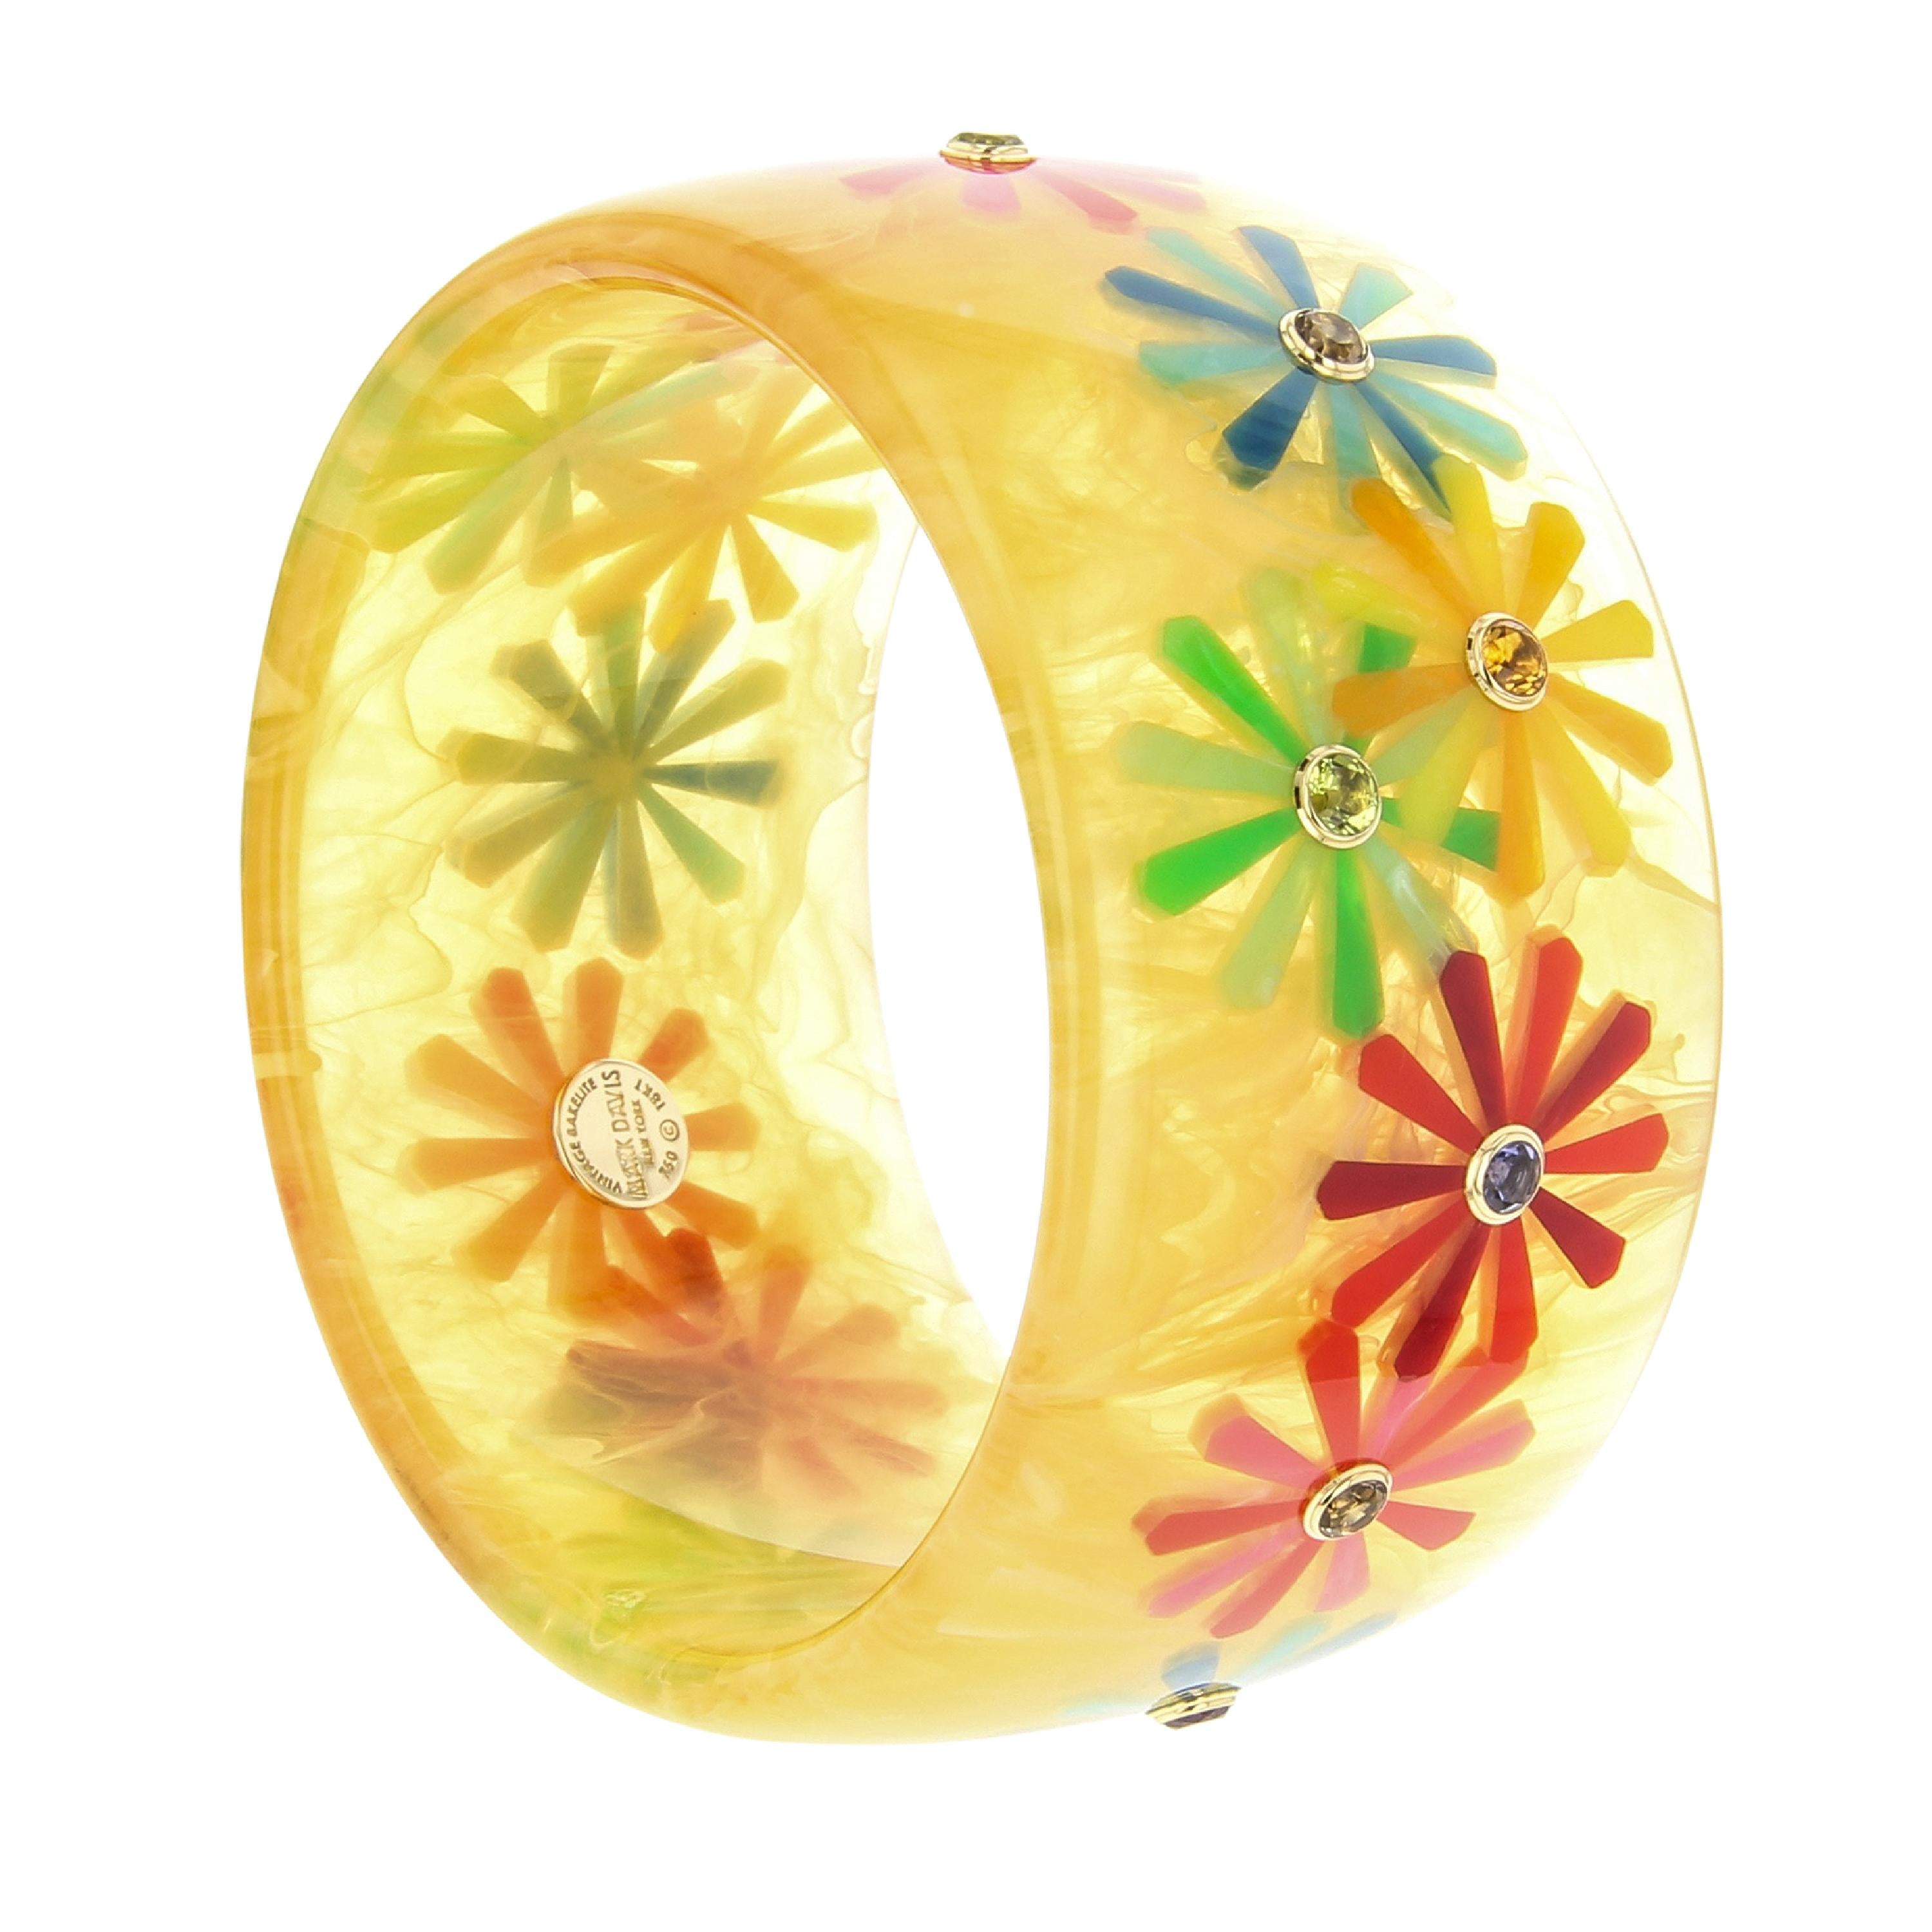 Contemporary Mark Davis Vintage Bakelite Bangle with Floral Inlay and Fine Gemstones in 18k For Sale